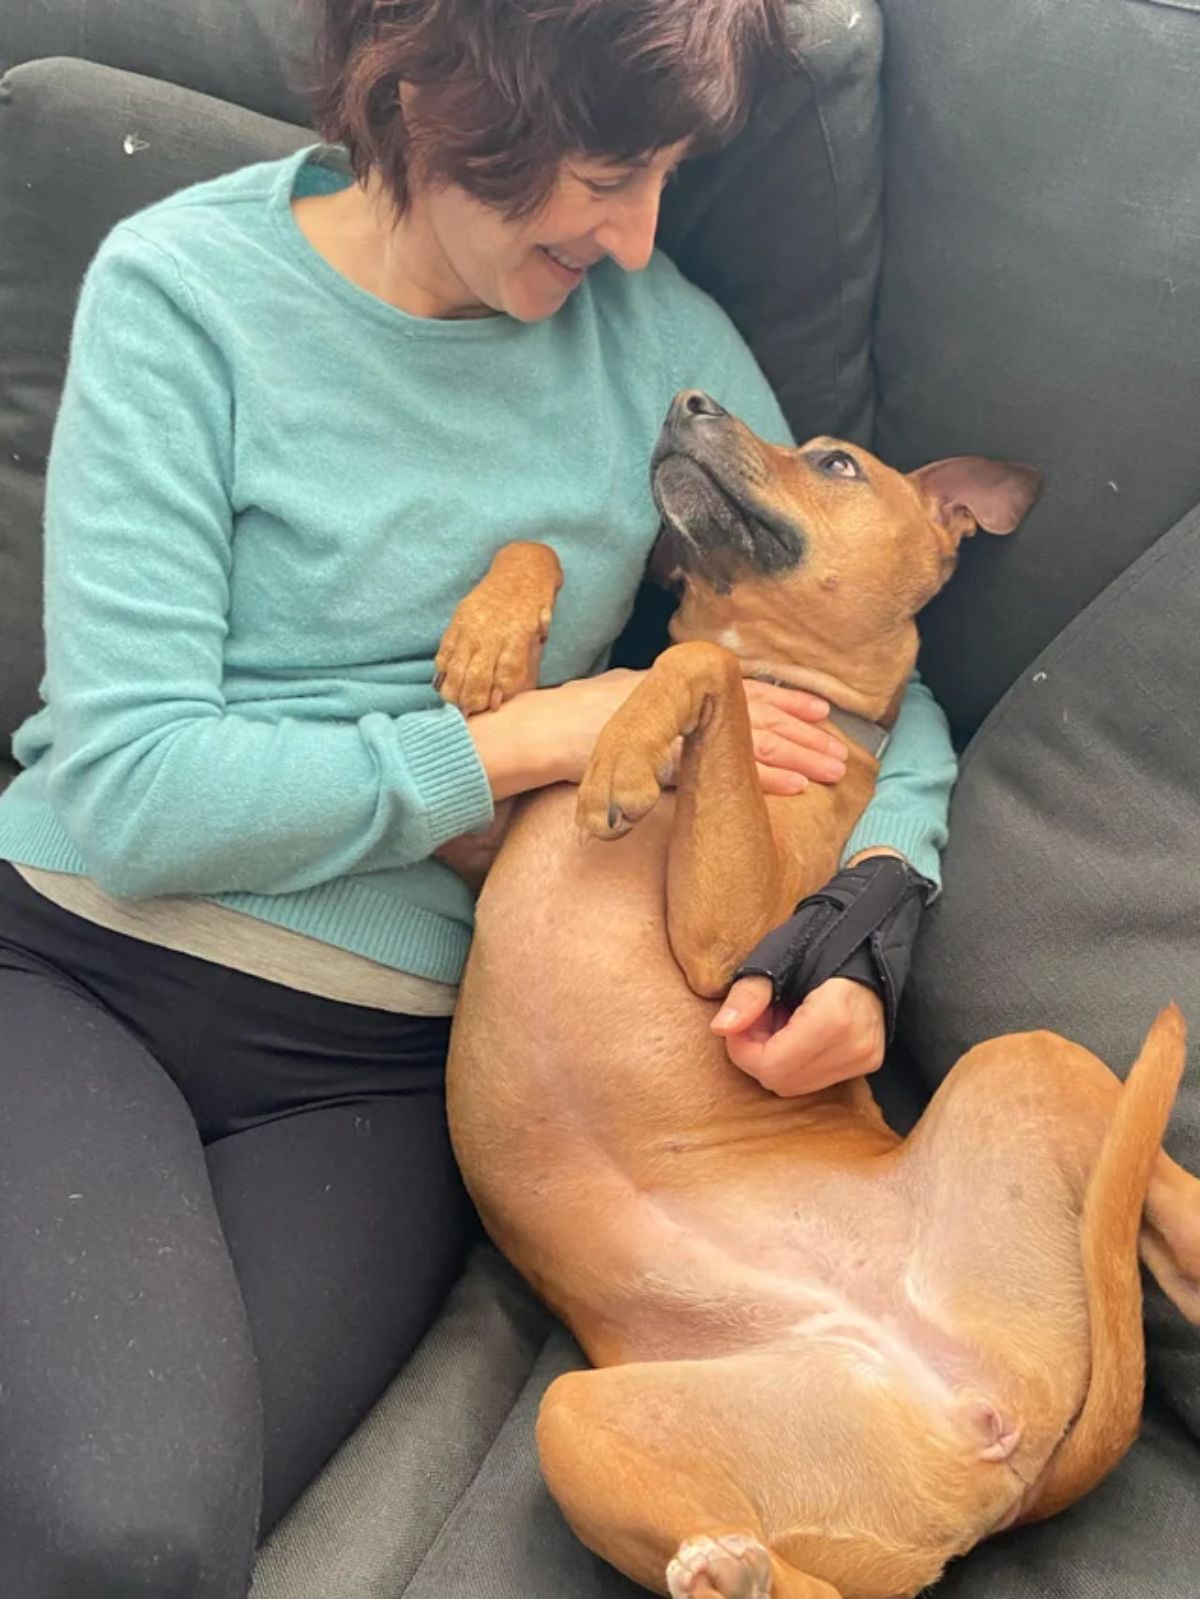 brown dog being hugged by a woman and they are looking at each other lovingly